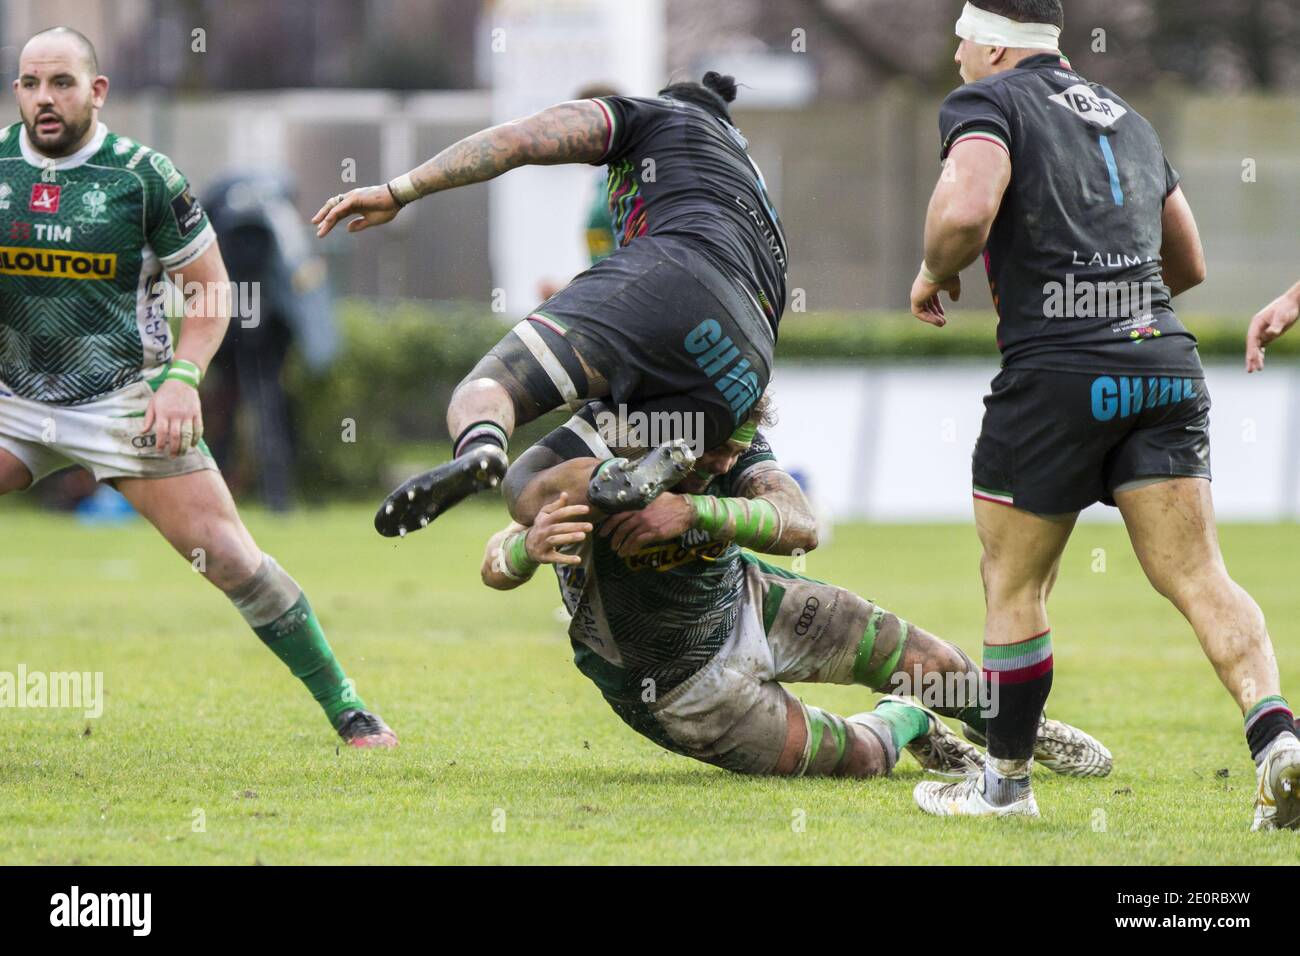 Treviso, Italy. 2nd Jan, 2021. Treviso, Italy, Monigo Stadium, January 02,  2021, jimmy tuivaiti zebre tackled by niccolÃƒÂ² cannone benetton during  Benetton Treviso vs Zebre Rugby - Rugby Guinness Pro 14 match